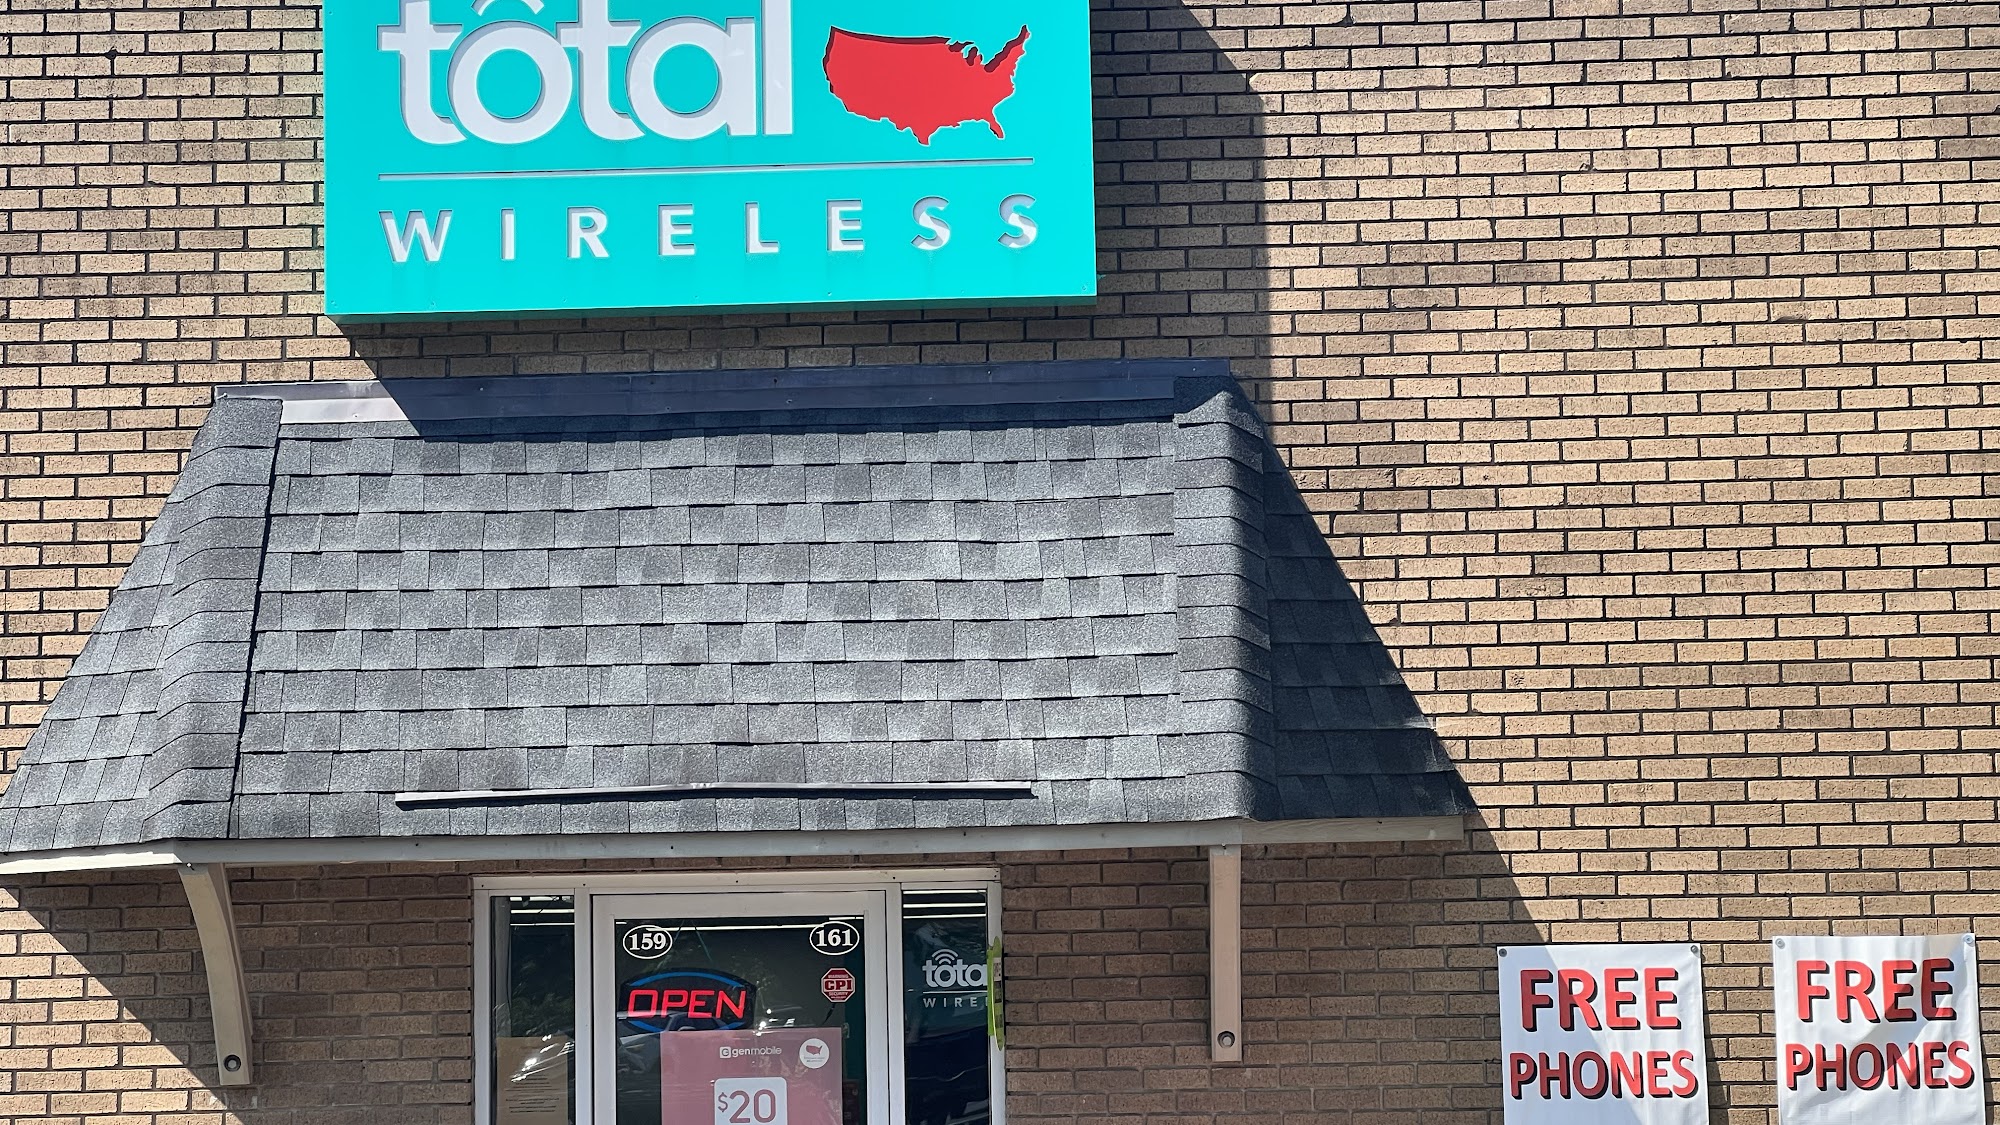 Total Wireless Store